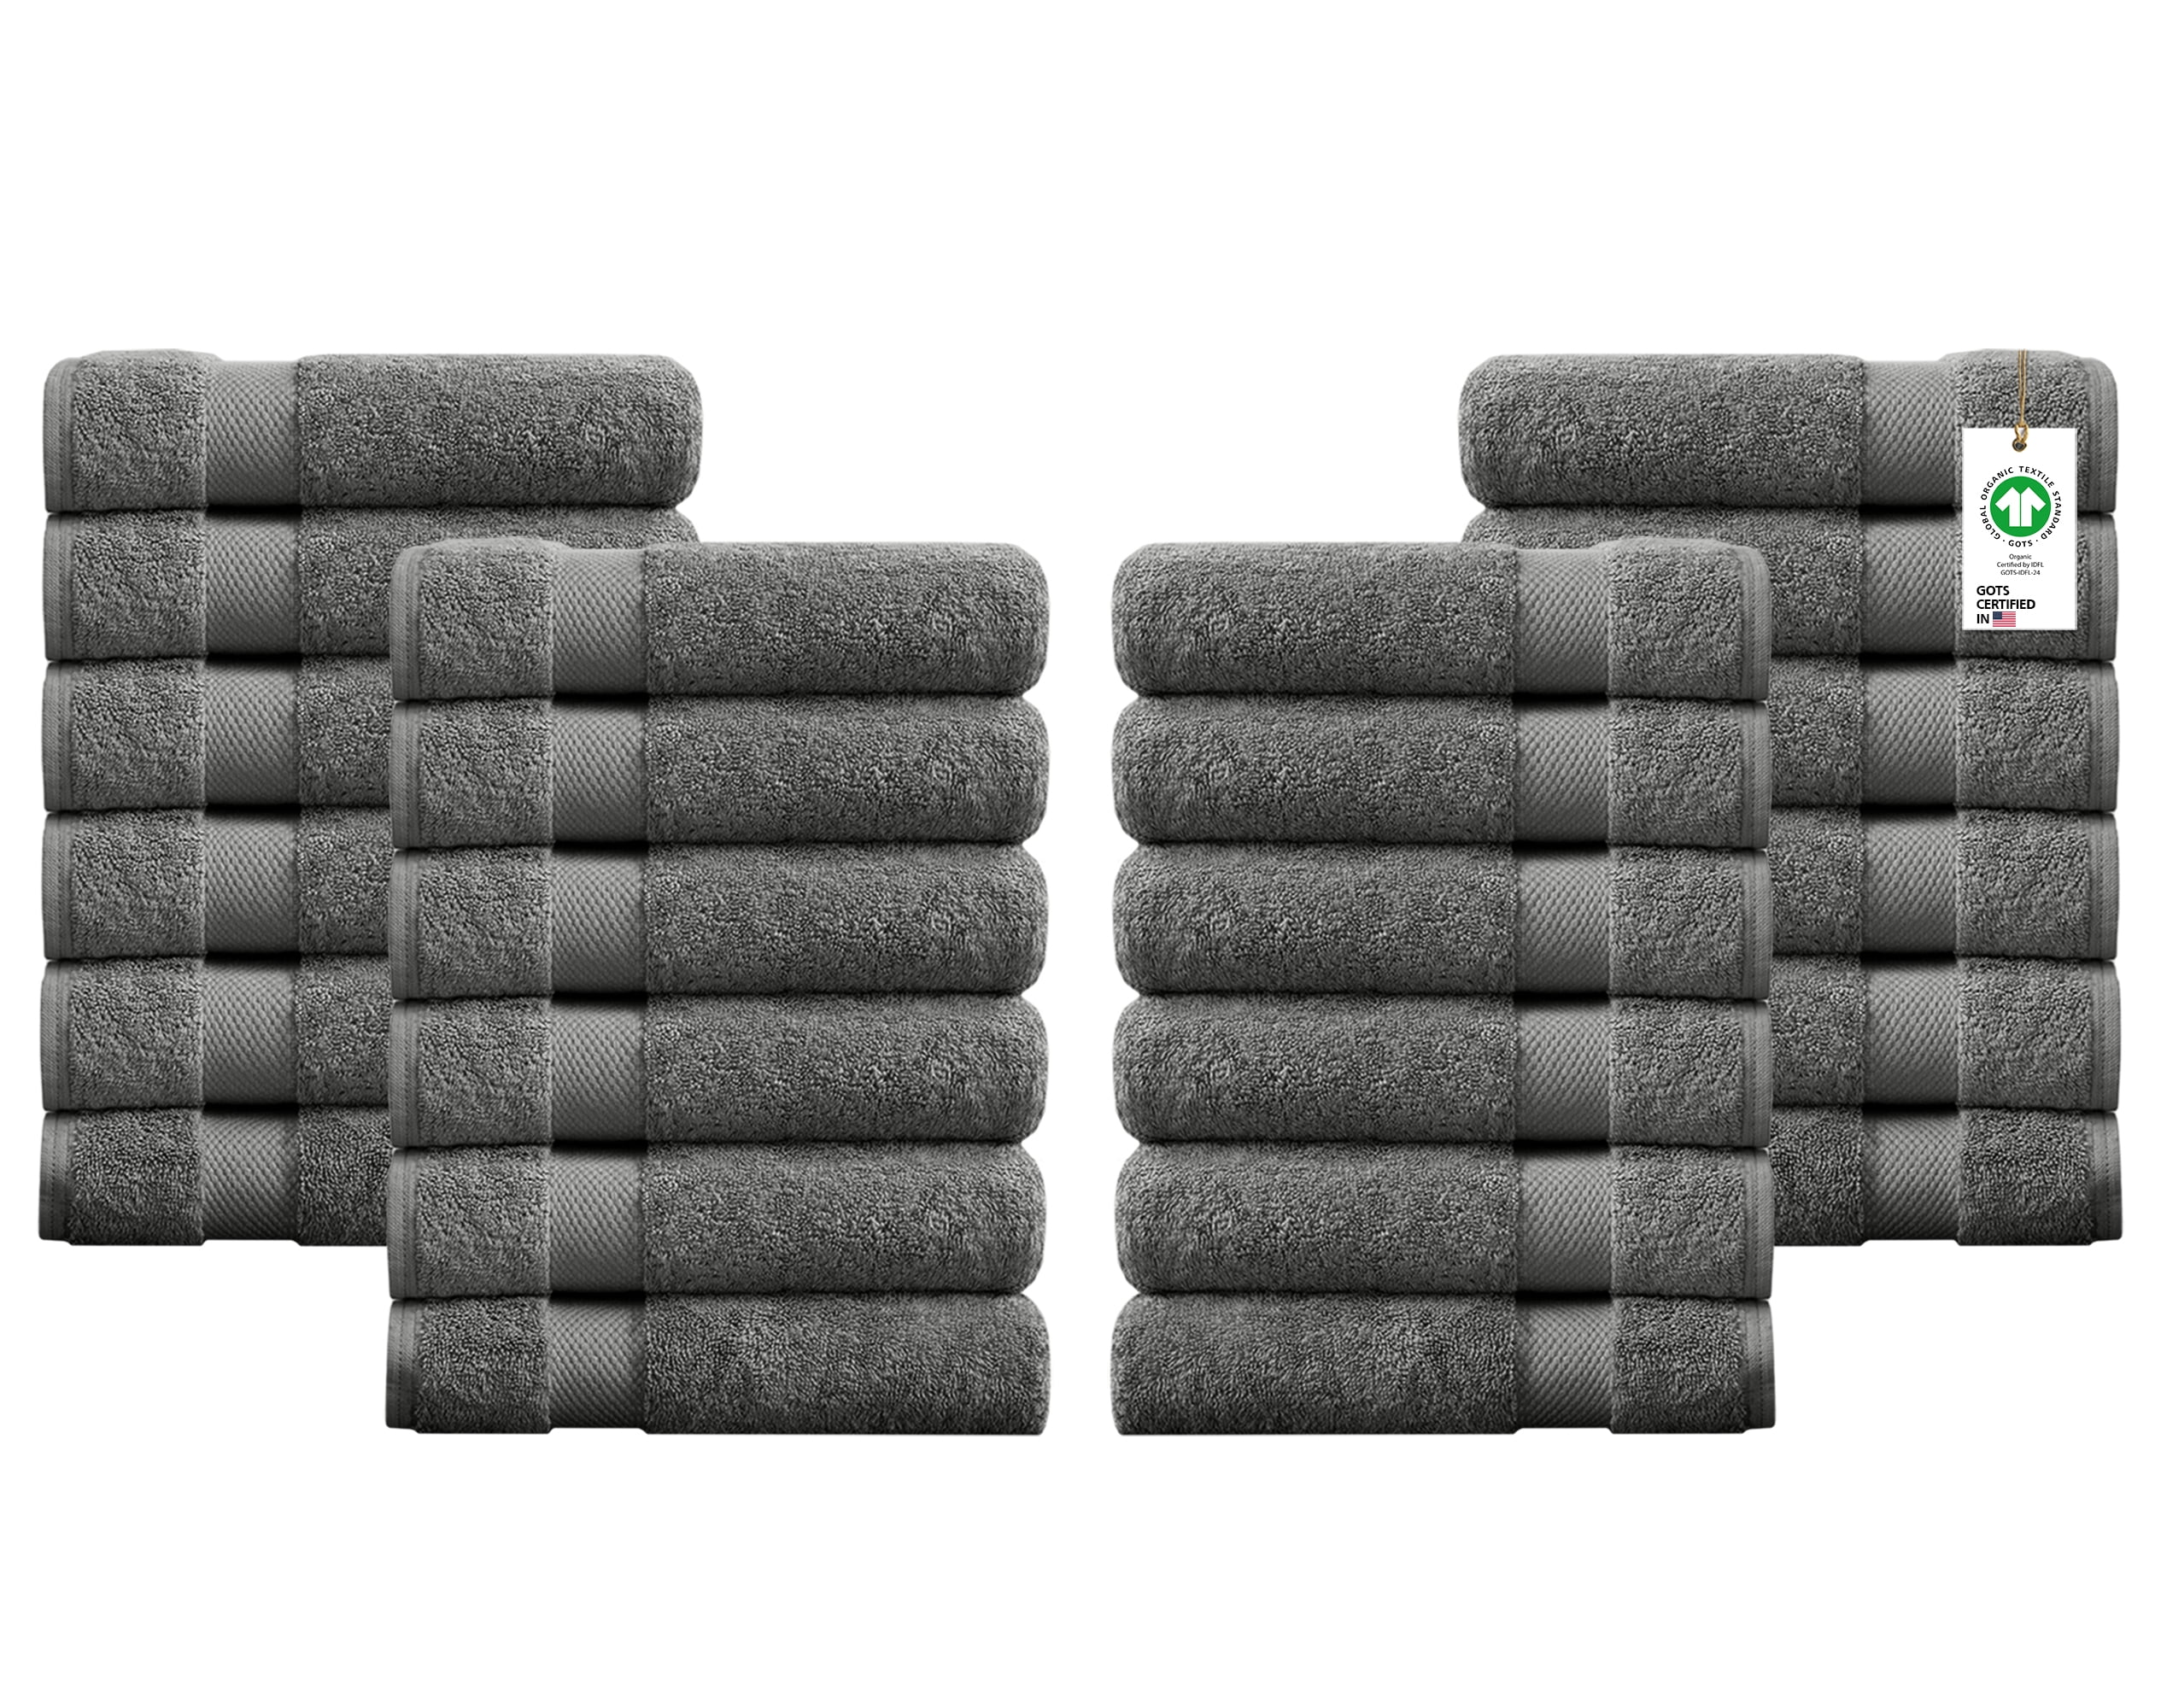 A1 Home Collections A1HC Feather Touch Quick Dry 20 in. x 33 in. Sharkskin  Grey Solid 100% Organic Cotton 900 GSM Rectangle Bath Mat A1HCBM-GreyNW -  The Home Depot